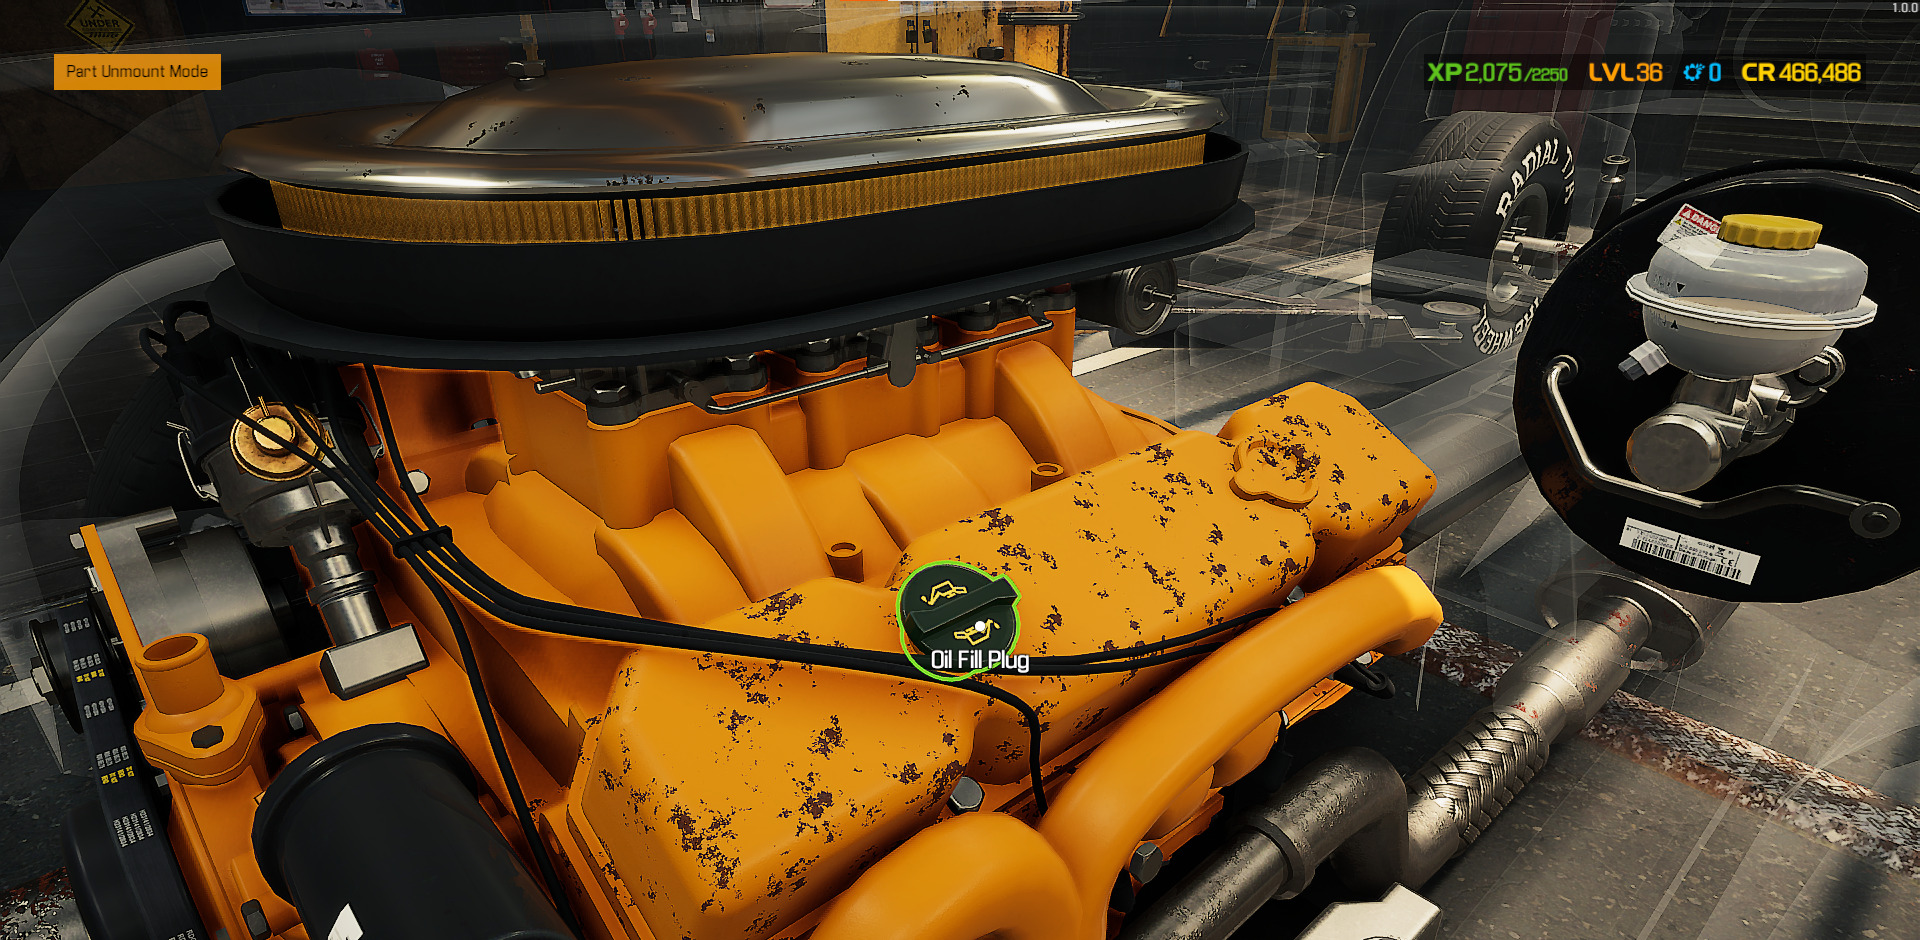 Locate the Oil fill plug to change your car's oil in Car Mechanic Simulator. 